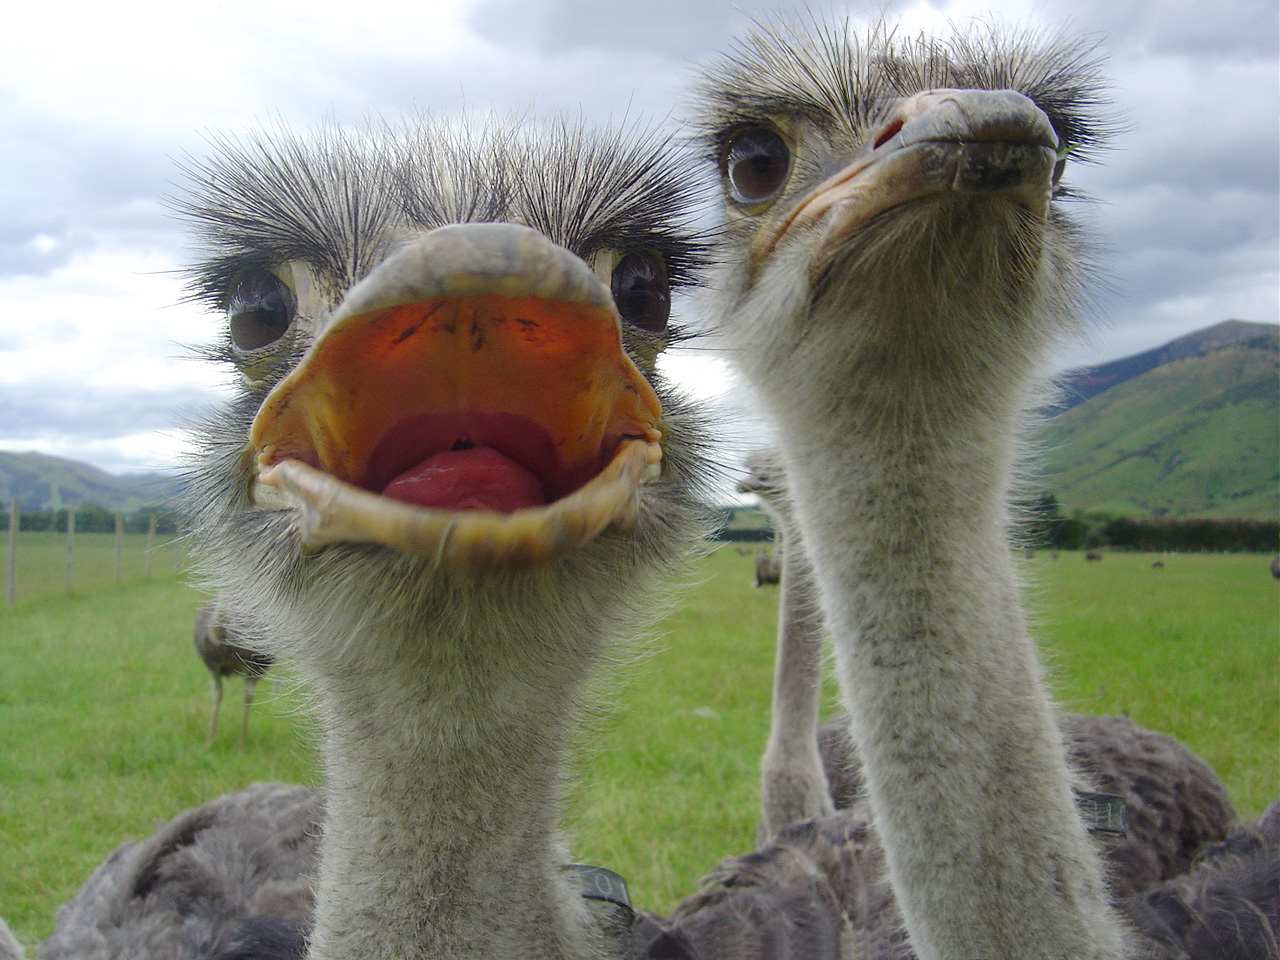 Open_Mouthed_Ostrich_by_AndySerrano.jpg